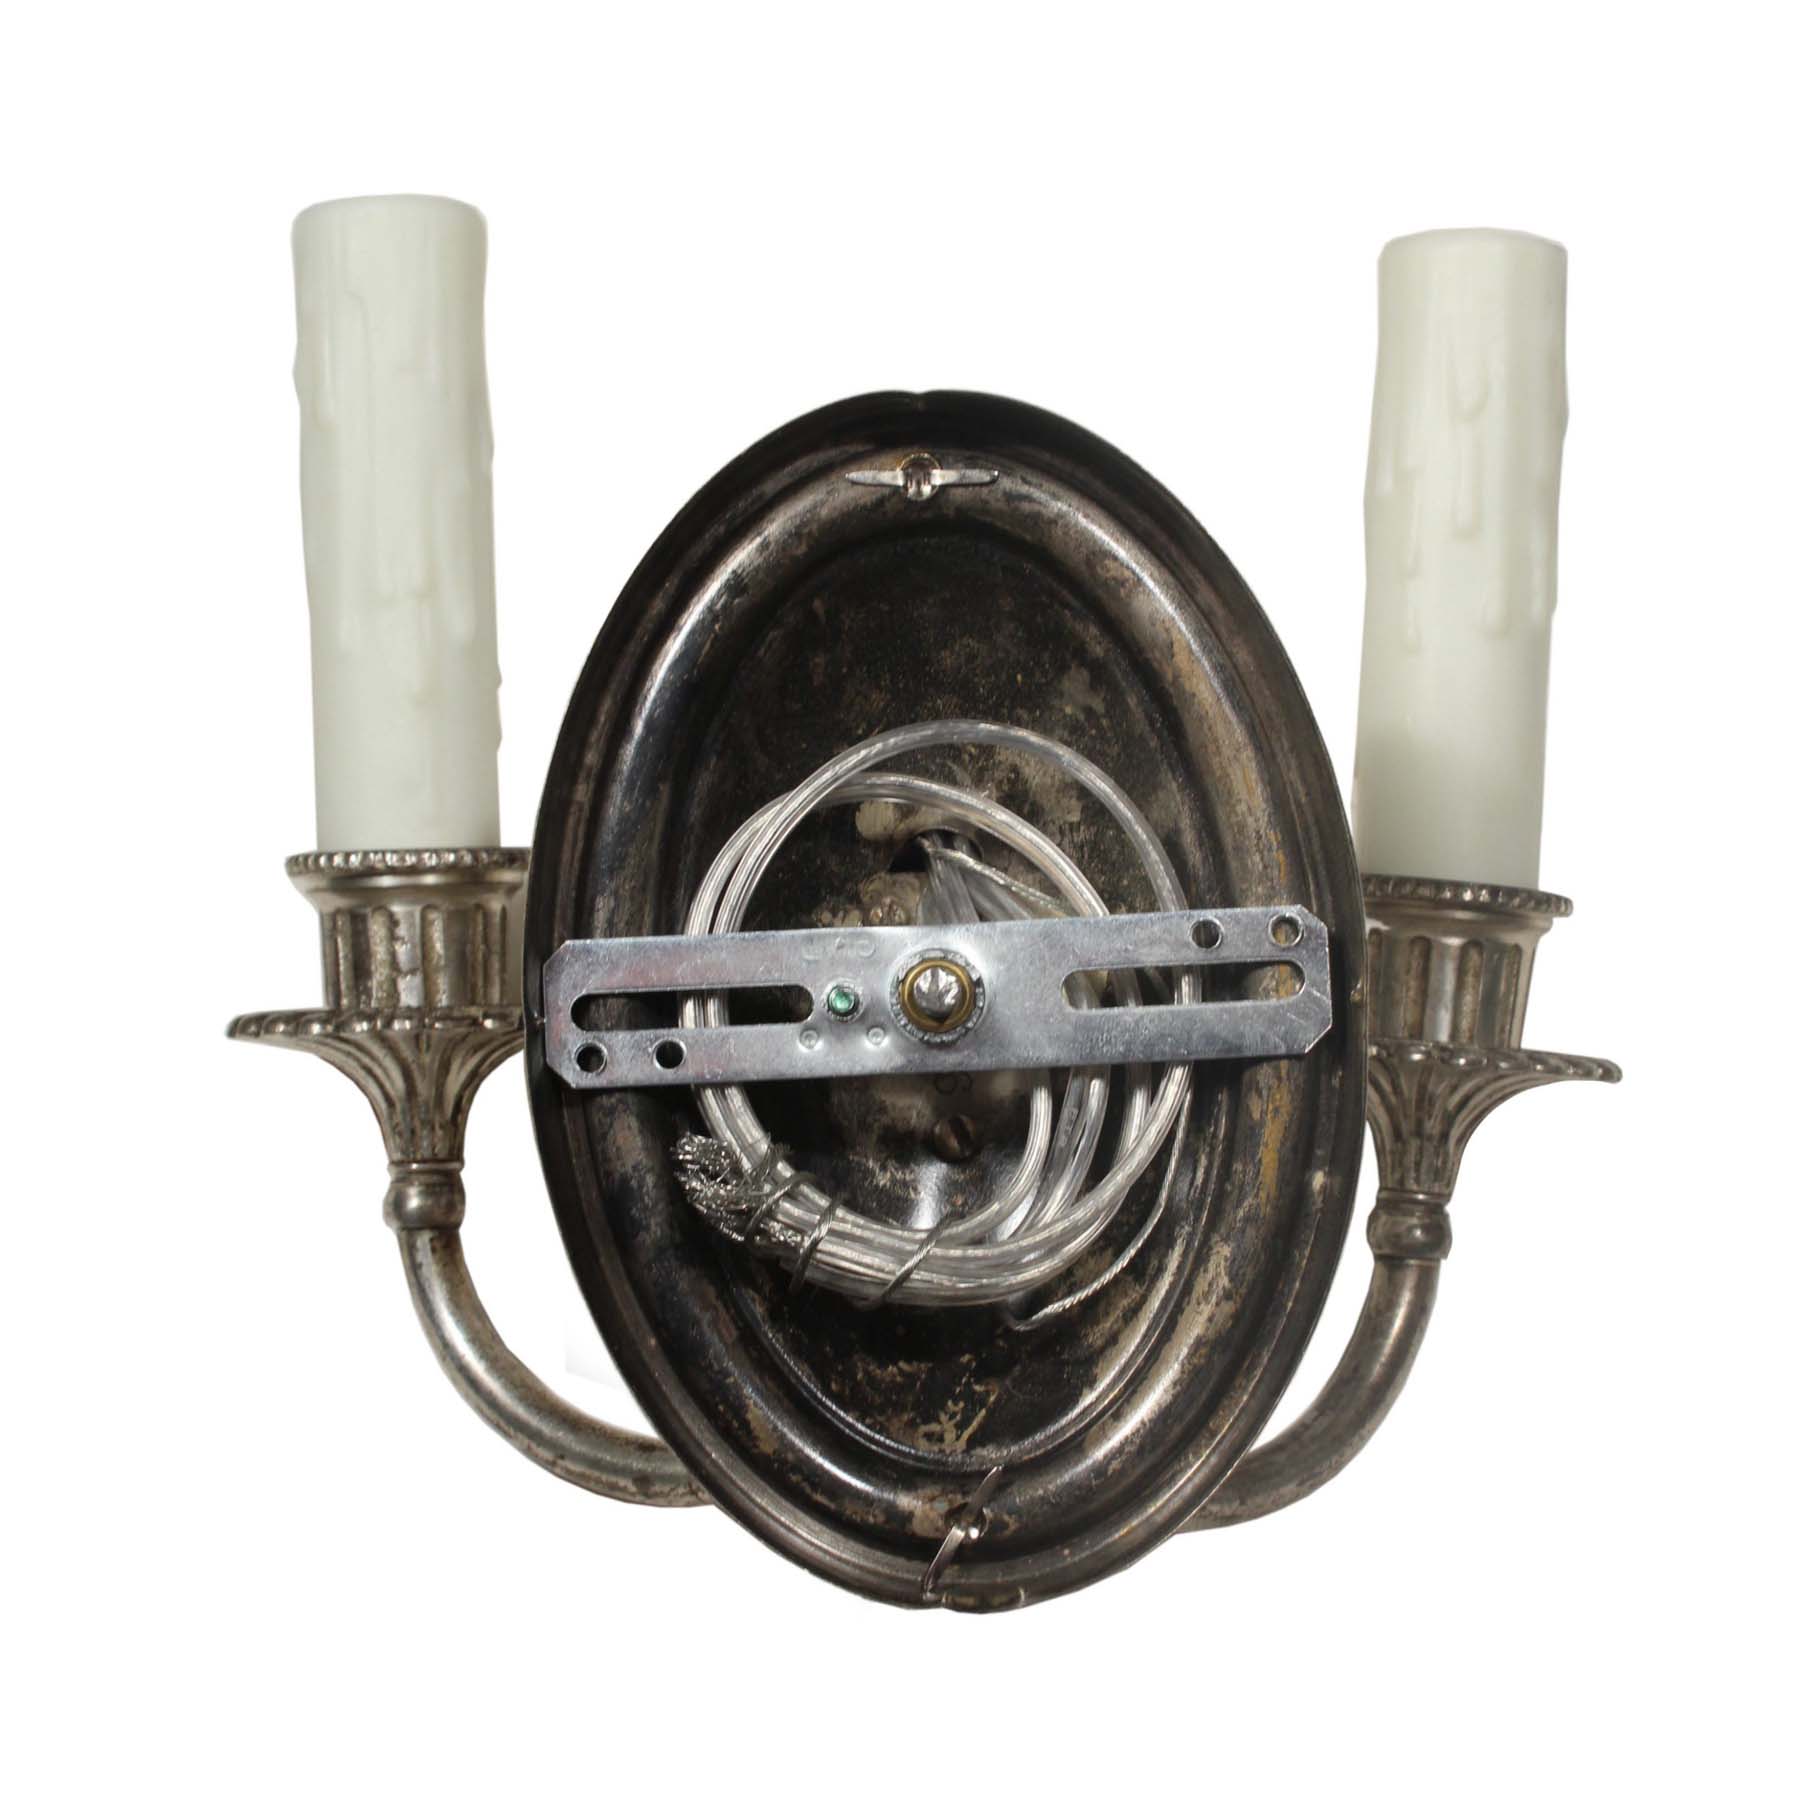 SOLD Pair of Silver Plated Double-Arm Sconces, Antique Lighting-67170